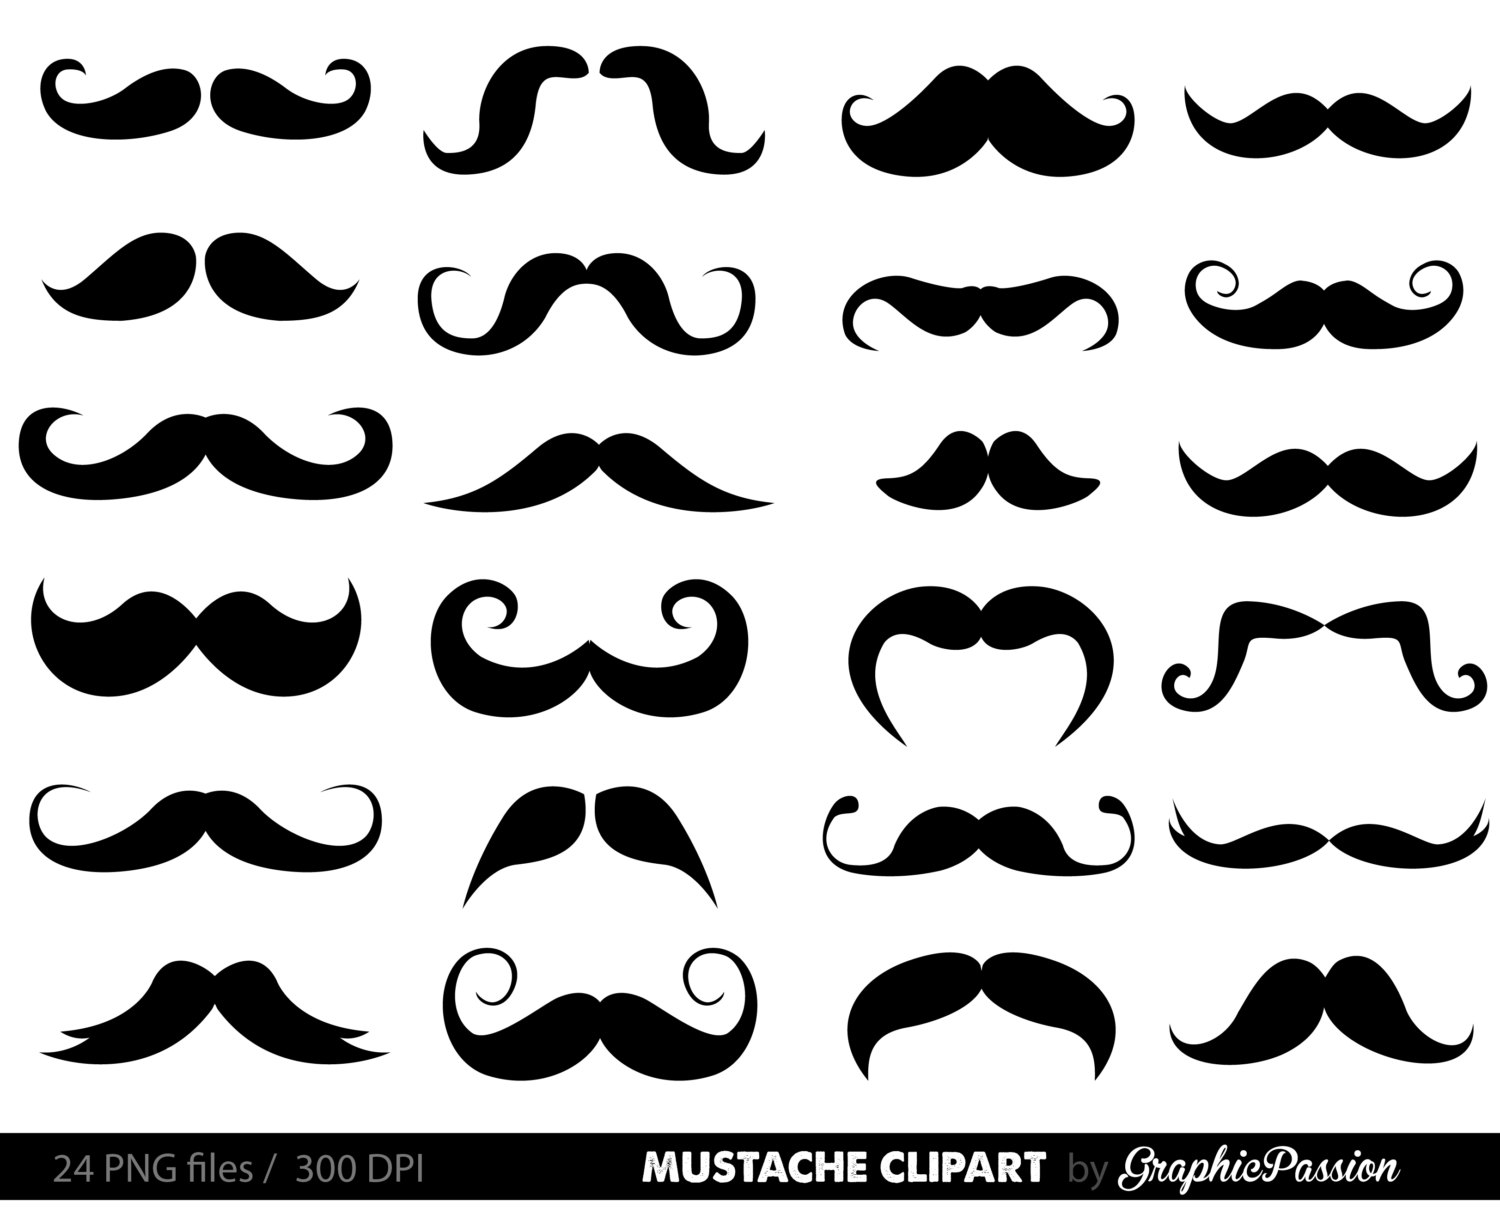 Popular items for hipster clipart